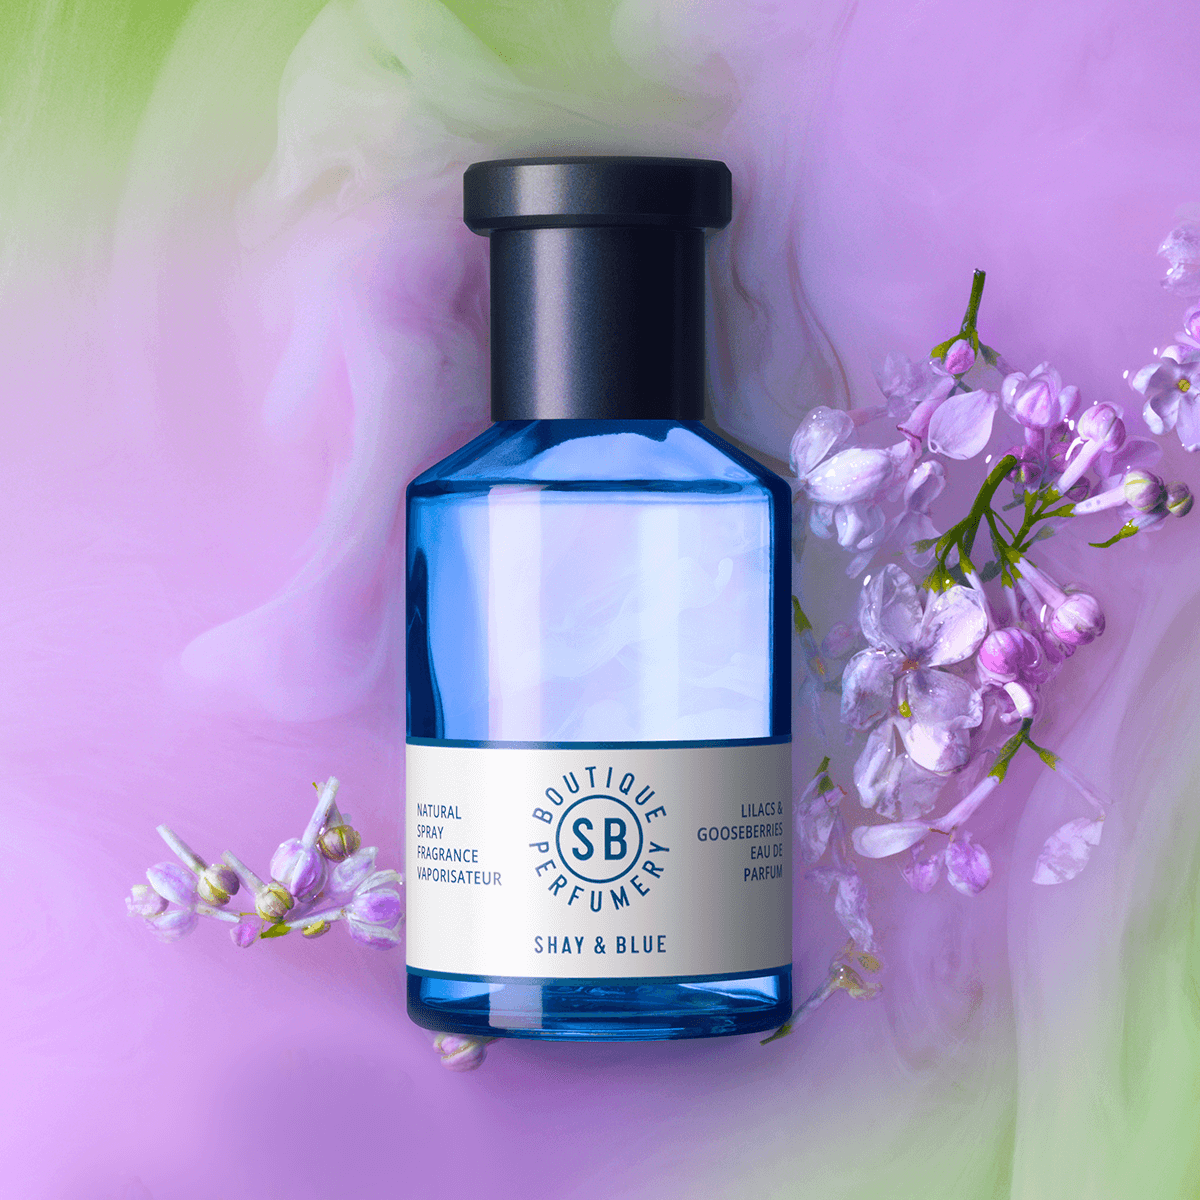 Lilacs & Gooseberries Fragrance 100ml | A twisted and addictive juicy floral. Obsessive Lilacs open to the thrill of dark demons. | Clean All Gender Fragrance | Shay & Blue